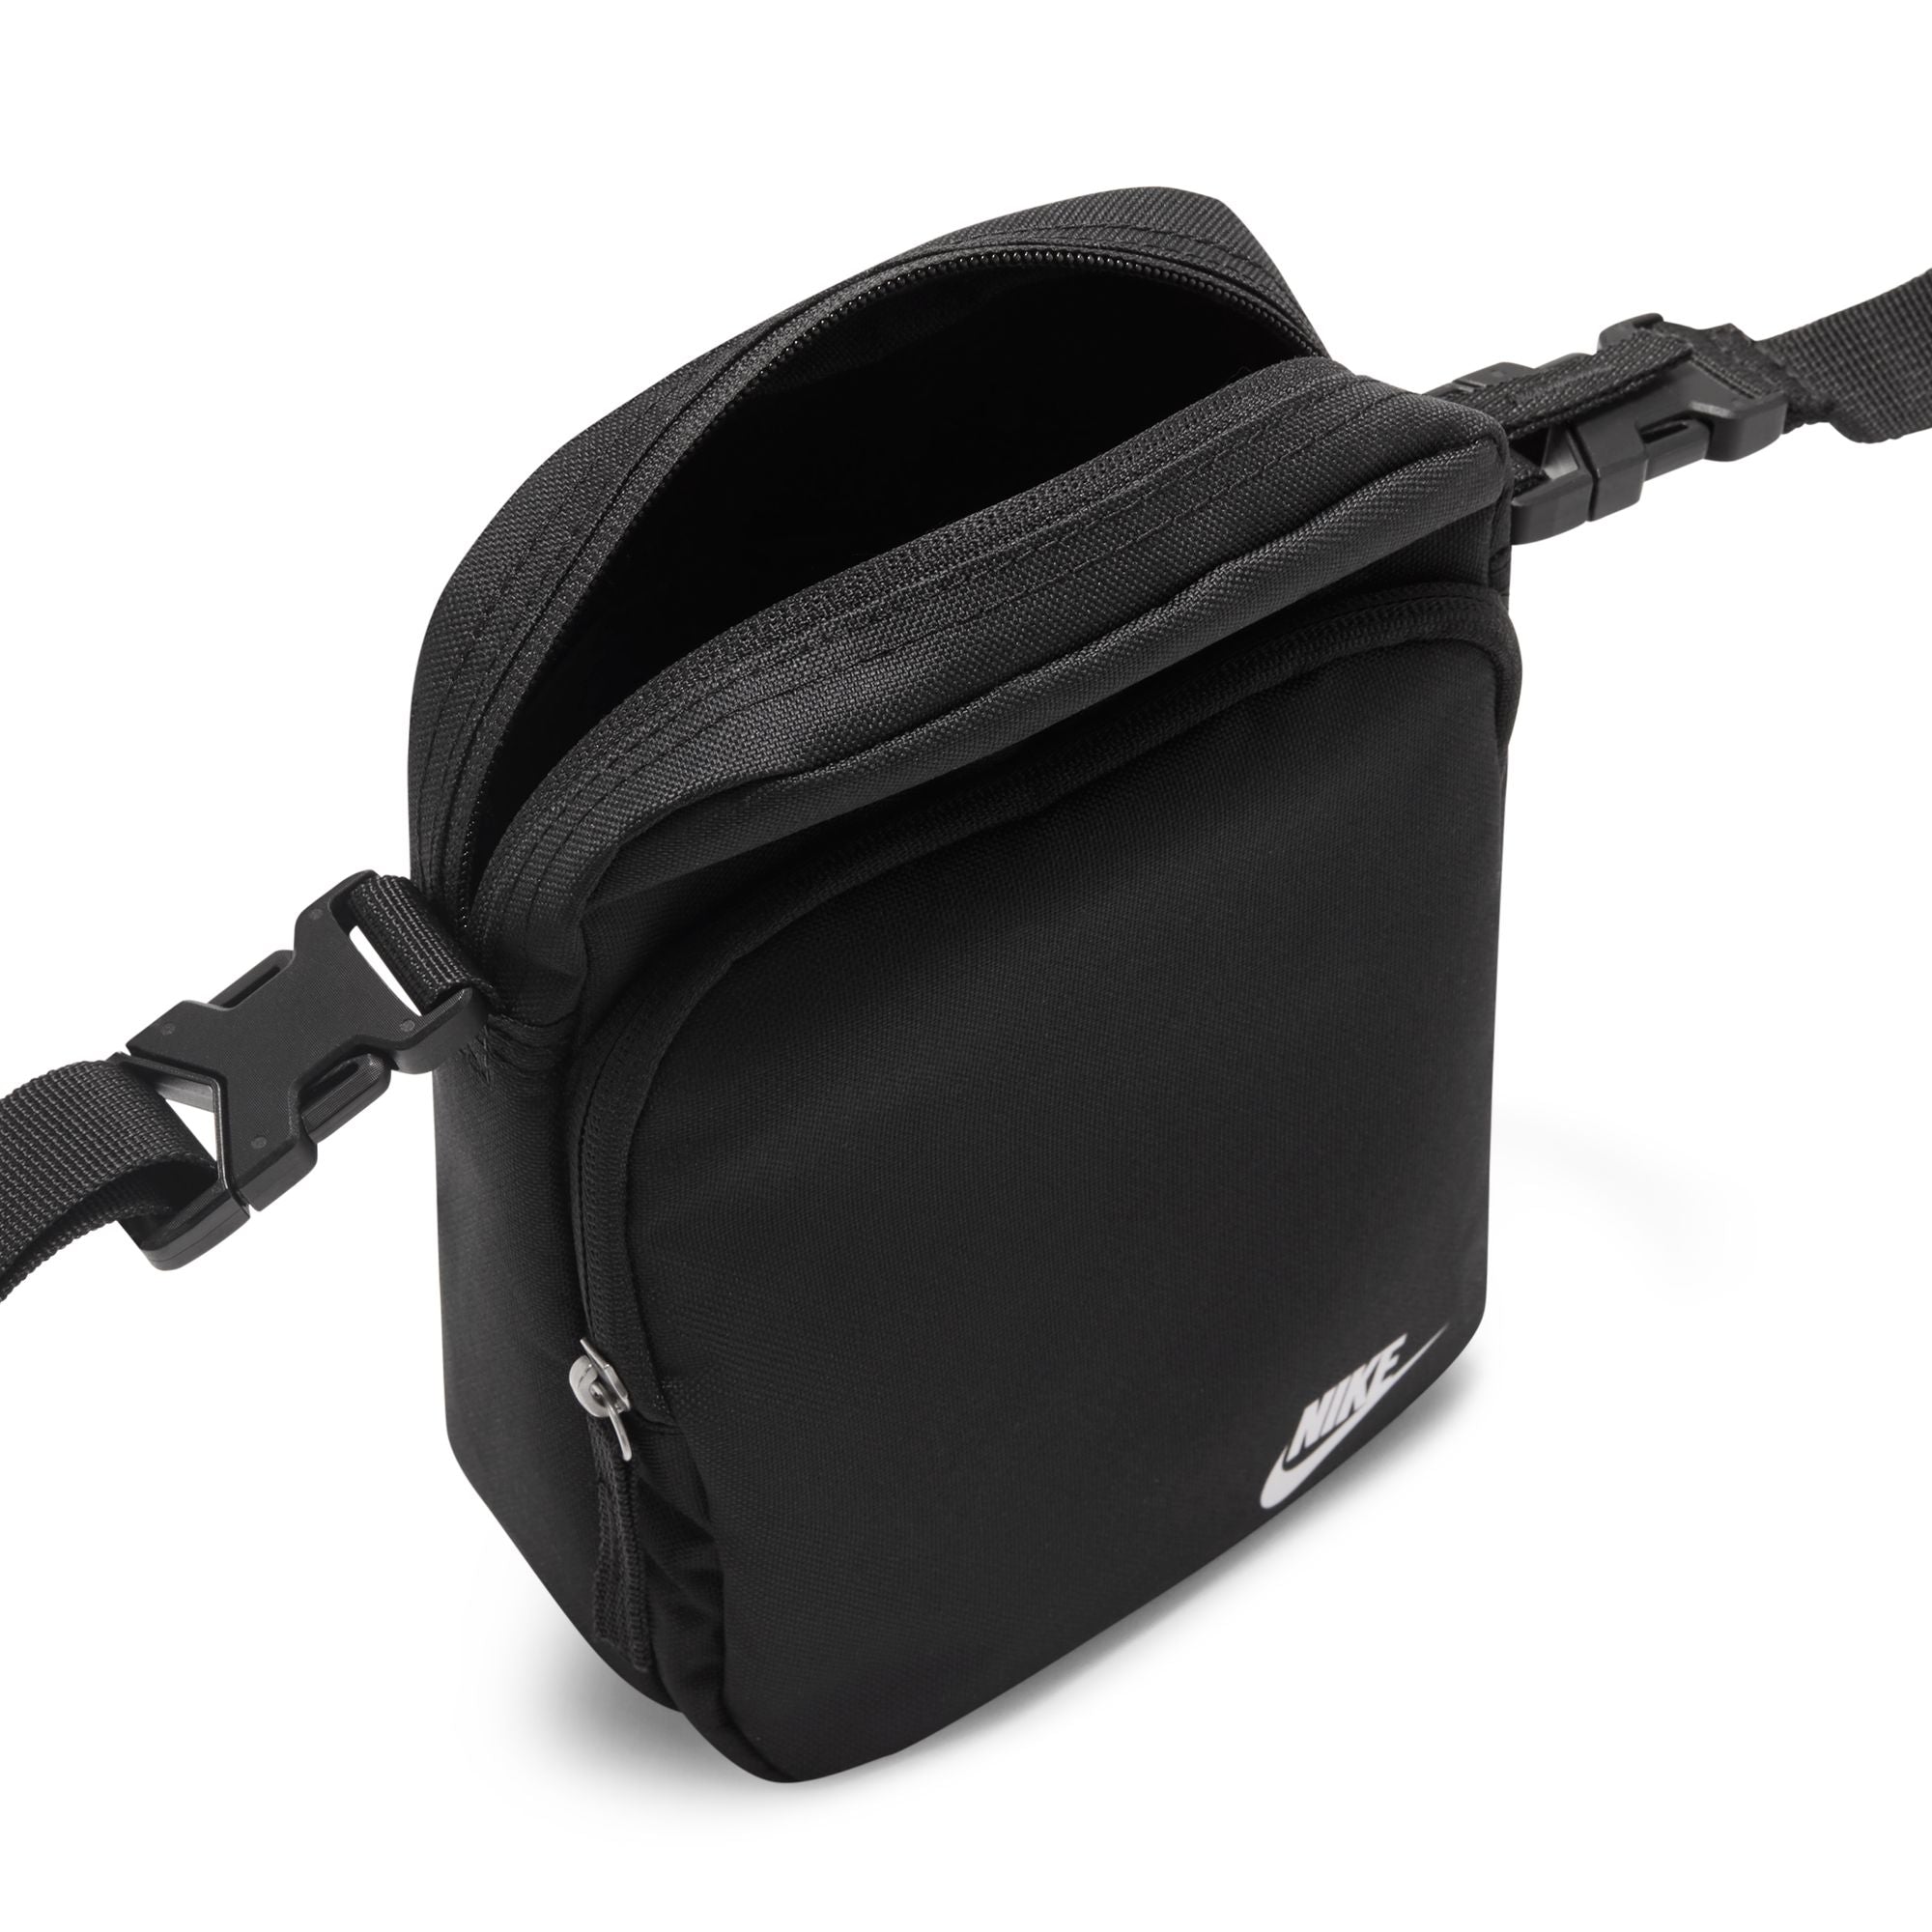 Black Nike heritage shoulder bag with small white Nike logo on front. Features two separate zipped compartments